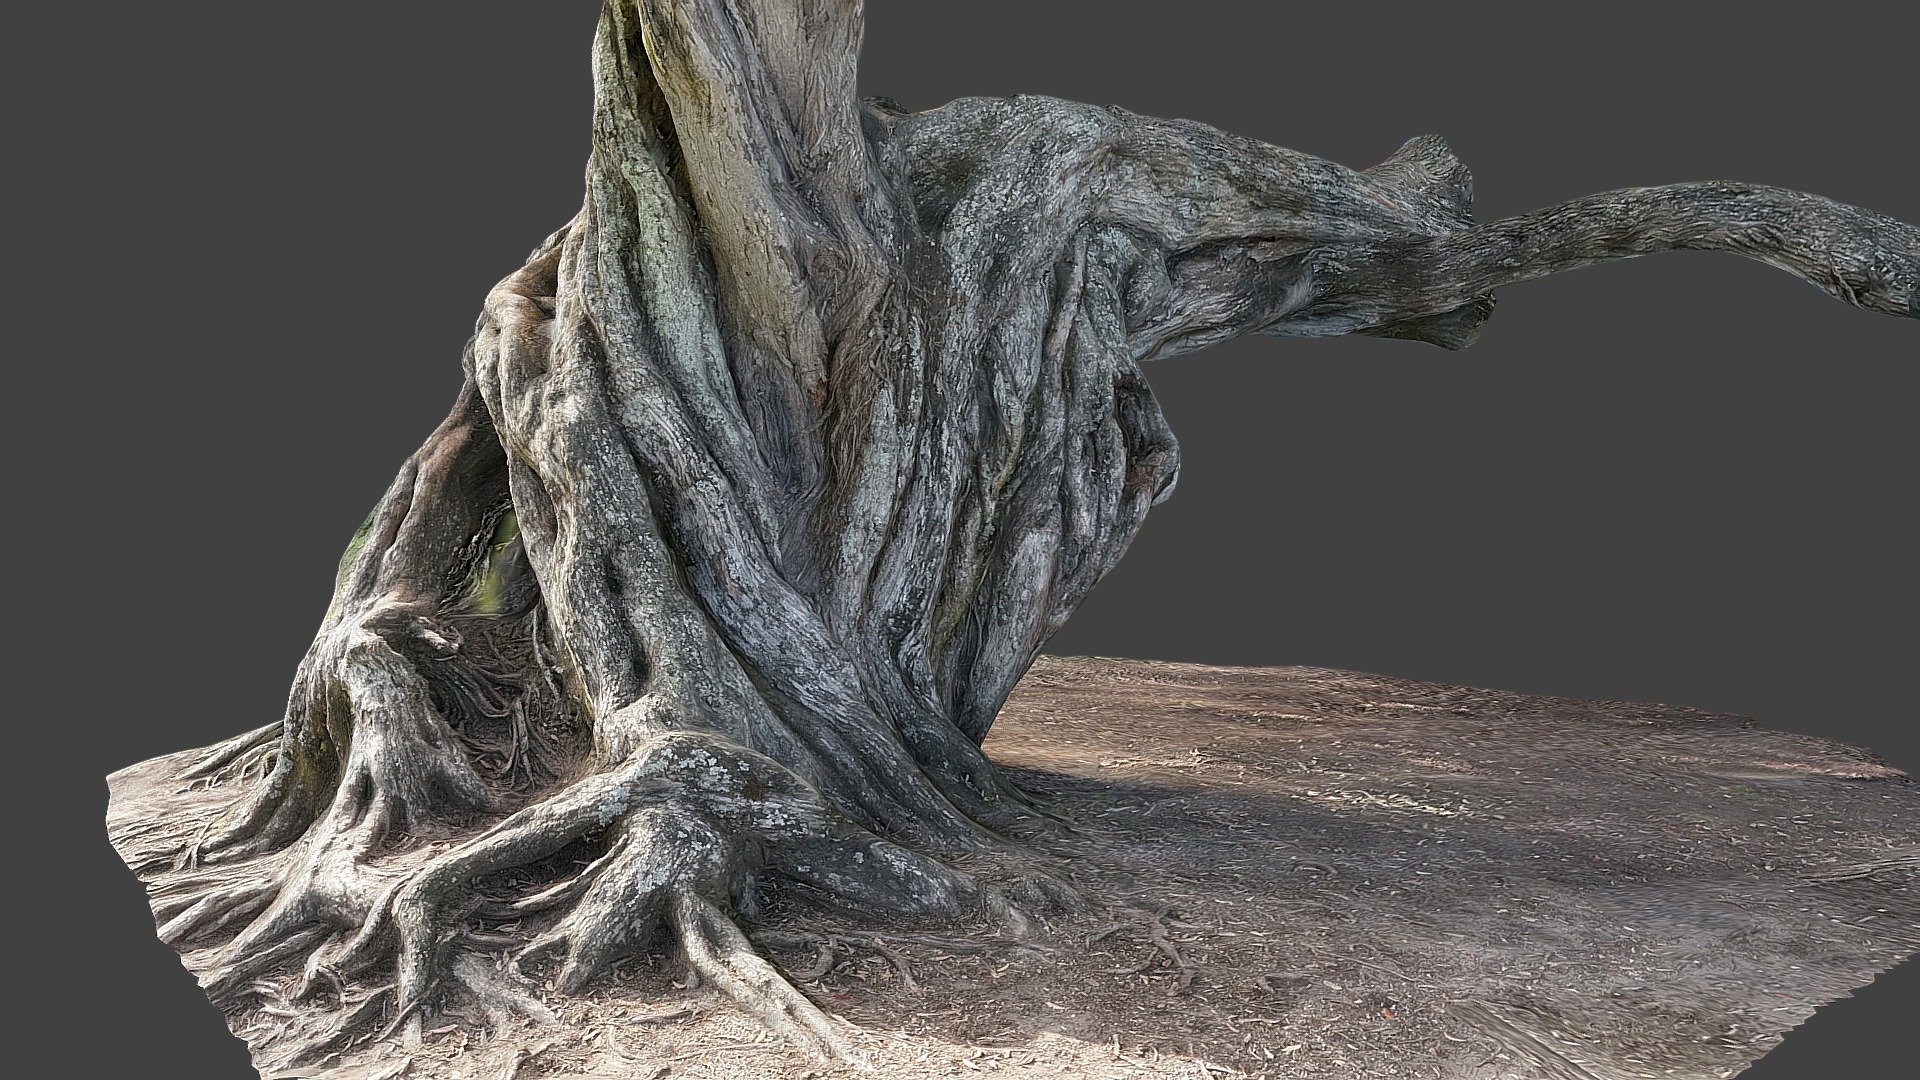 A more detailed model of the trunk, cropped to keep file size down. Its a cool tree to climb, you could fit a whole ewok village up there. Castor Bay, Auckland, New Zealand.  My 3D model from photos generated with photogrammetry software 3DF Zephyr v4.301 processing 50 images - Pohutukawa tree closeup - Download Free 3D model by b_nealie 3d model